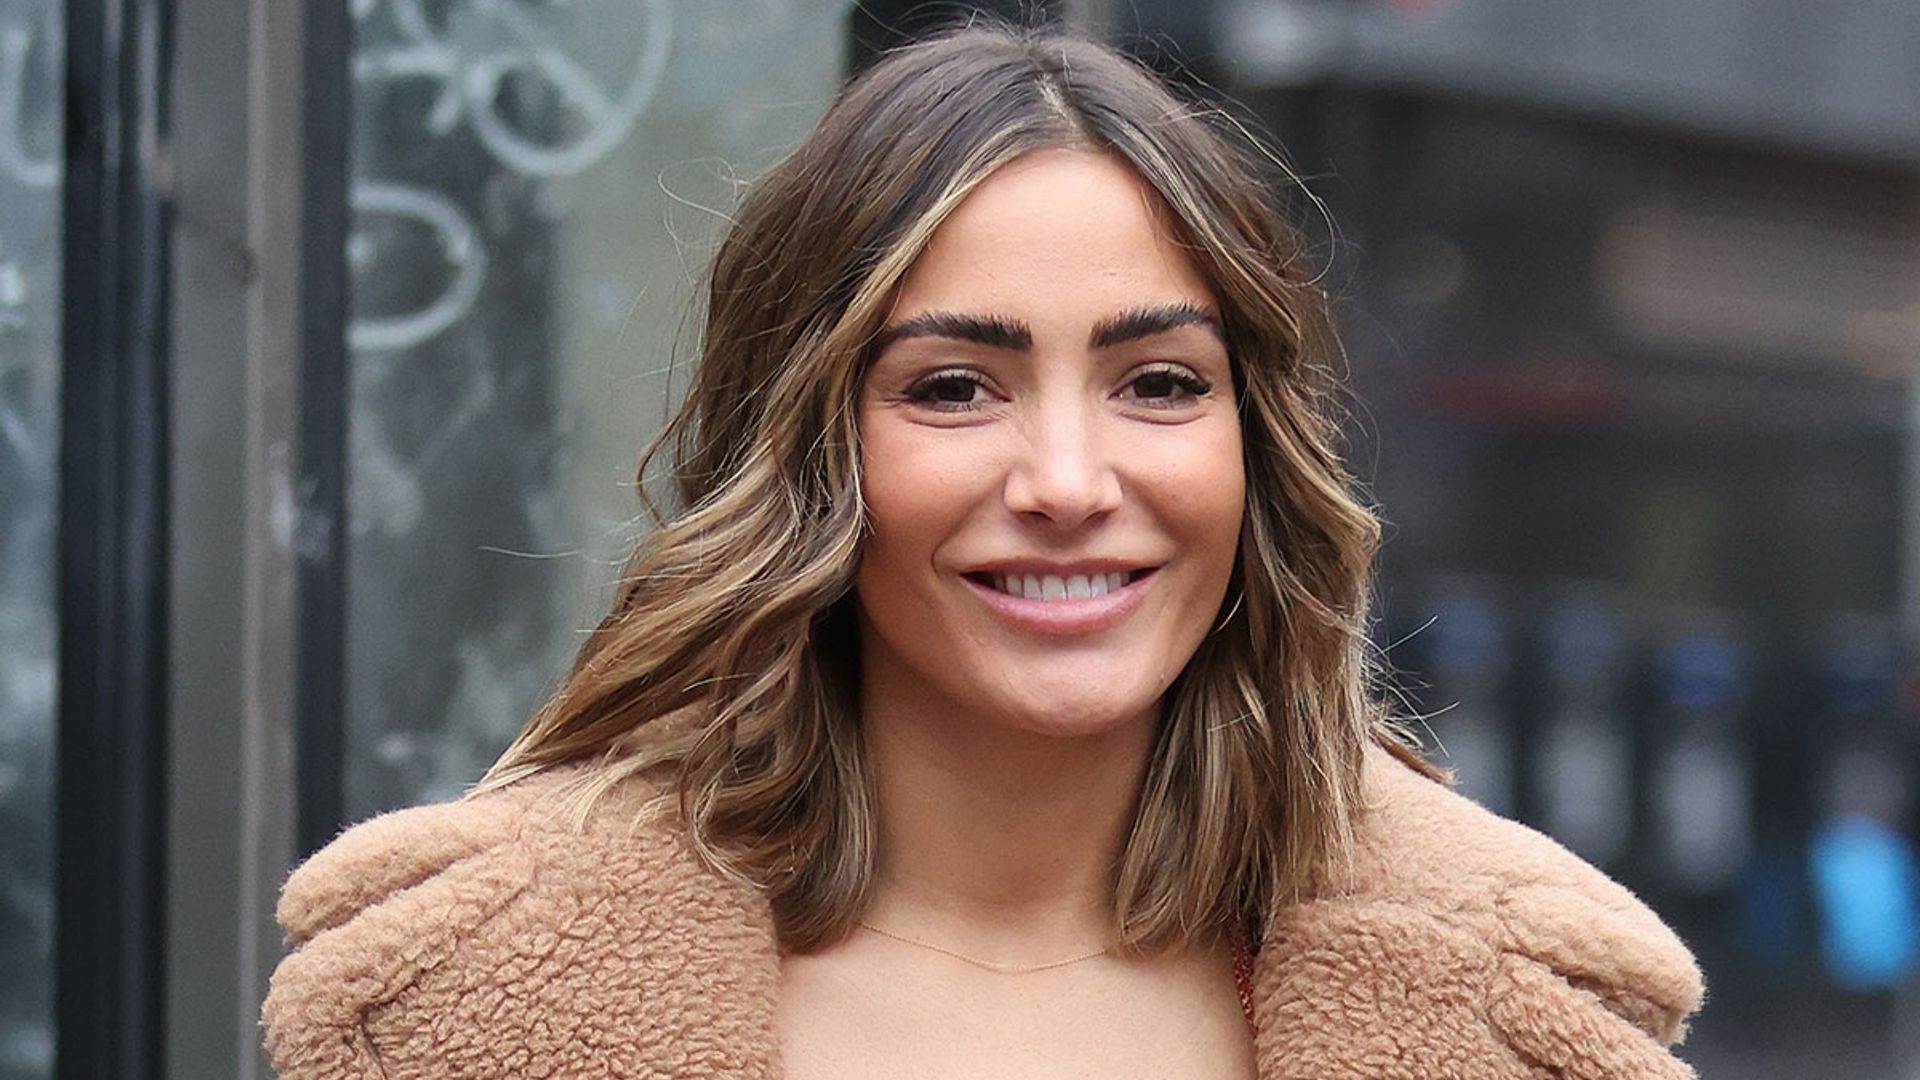 Frankie Bridge lights up Instagram with the most stunning sequin dress